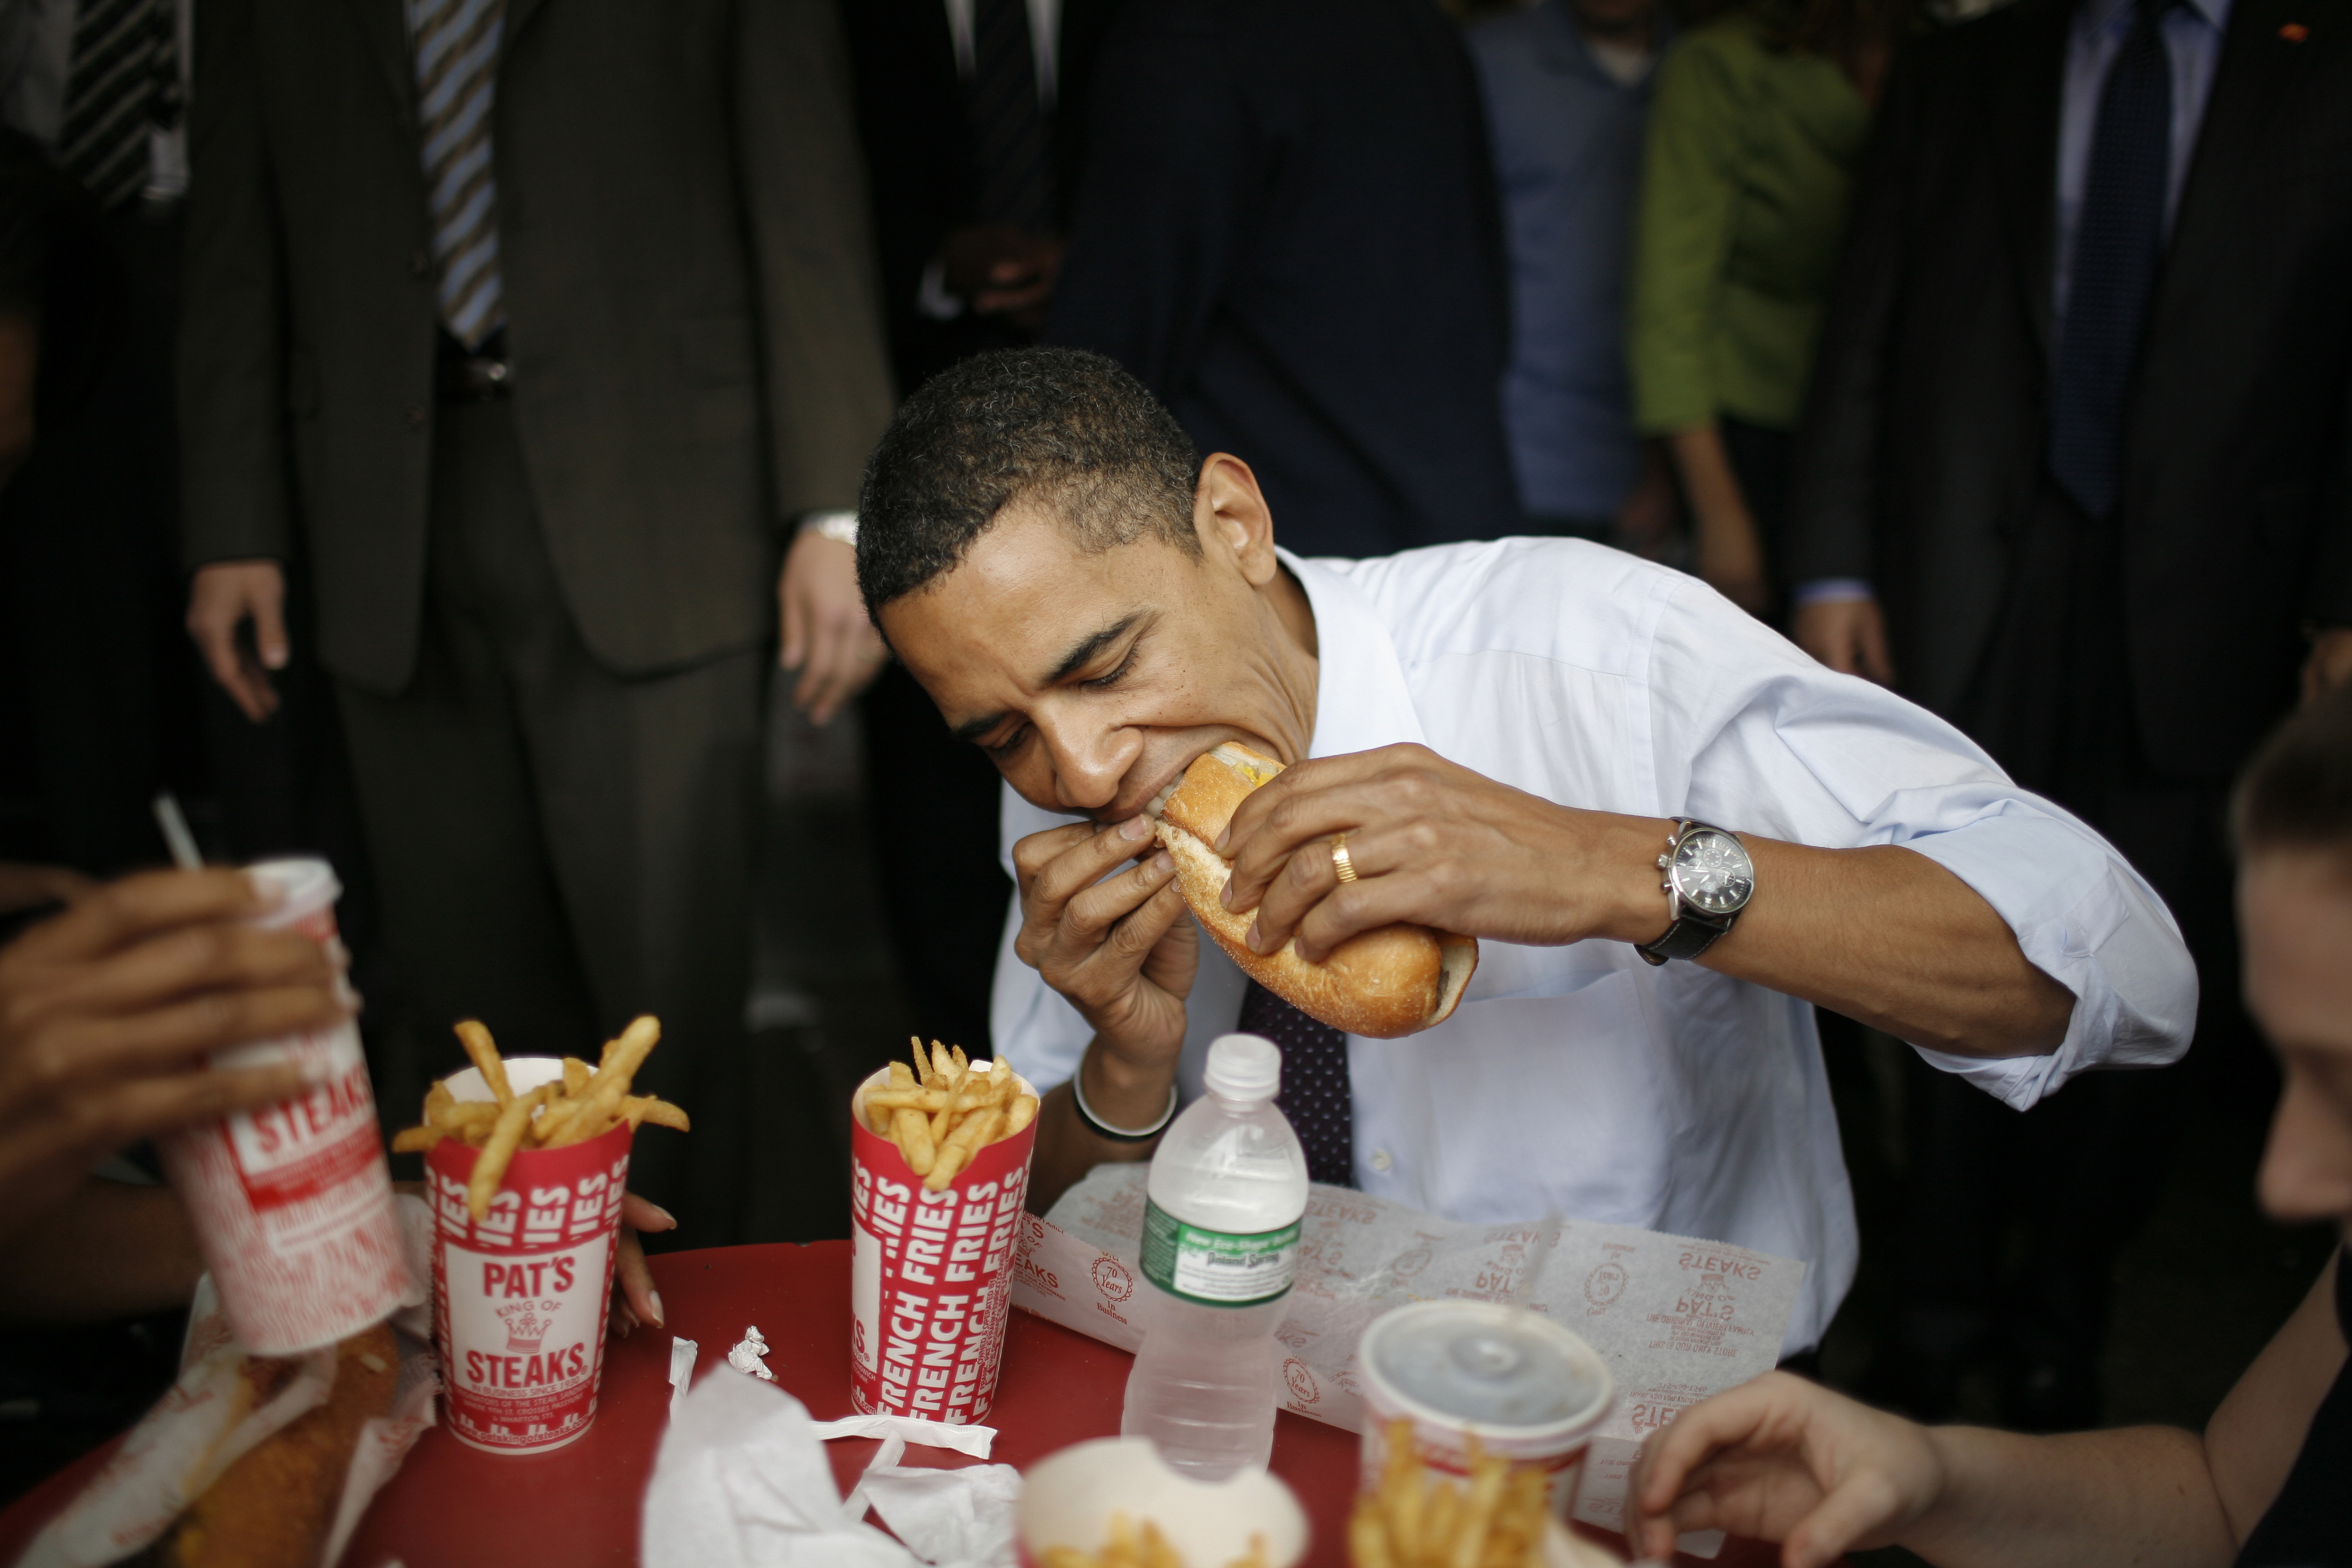 Democratic presidential candidate Senator Barack Obama and his wife Michelle eat a cheesesteak and fries during a campaign stop at Pat’s King of Steaks April 22, 2008 in Philadelphia, Pennsylvania.